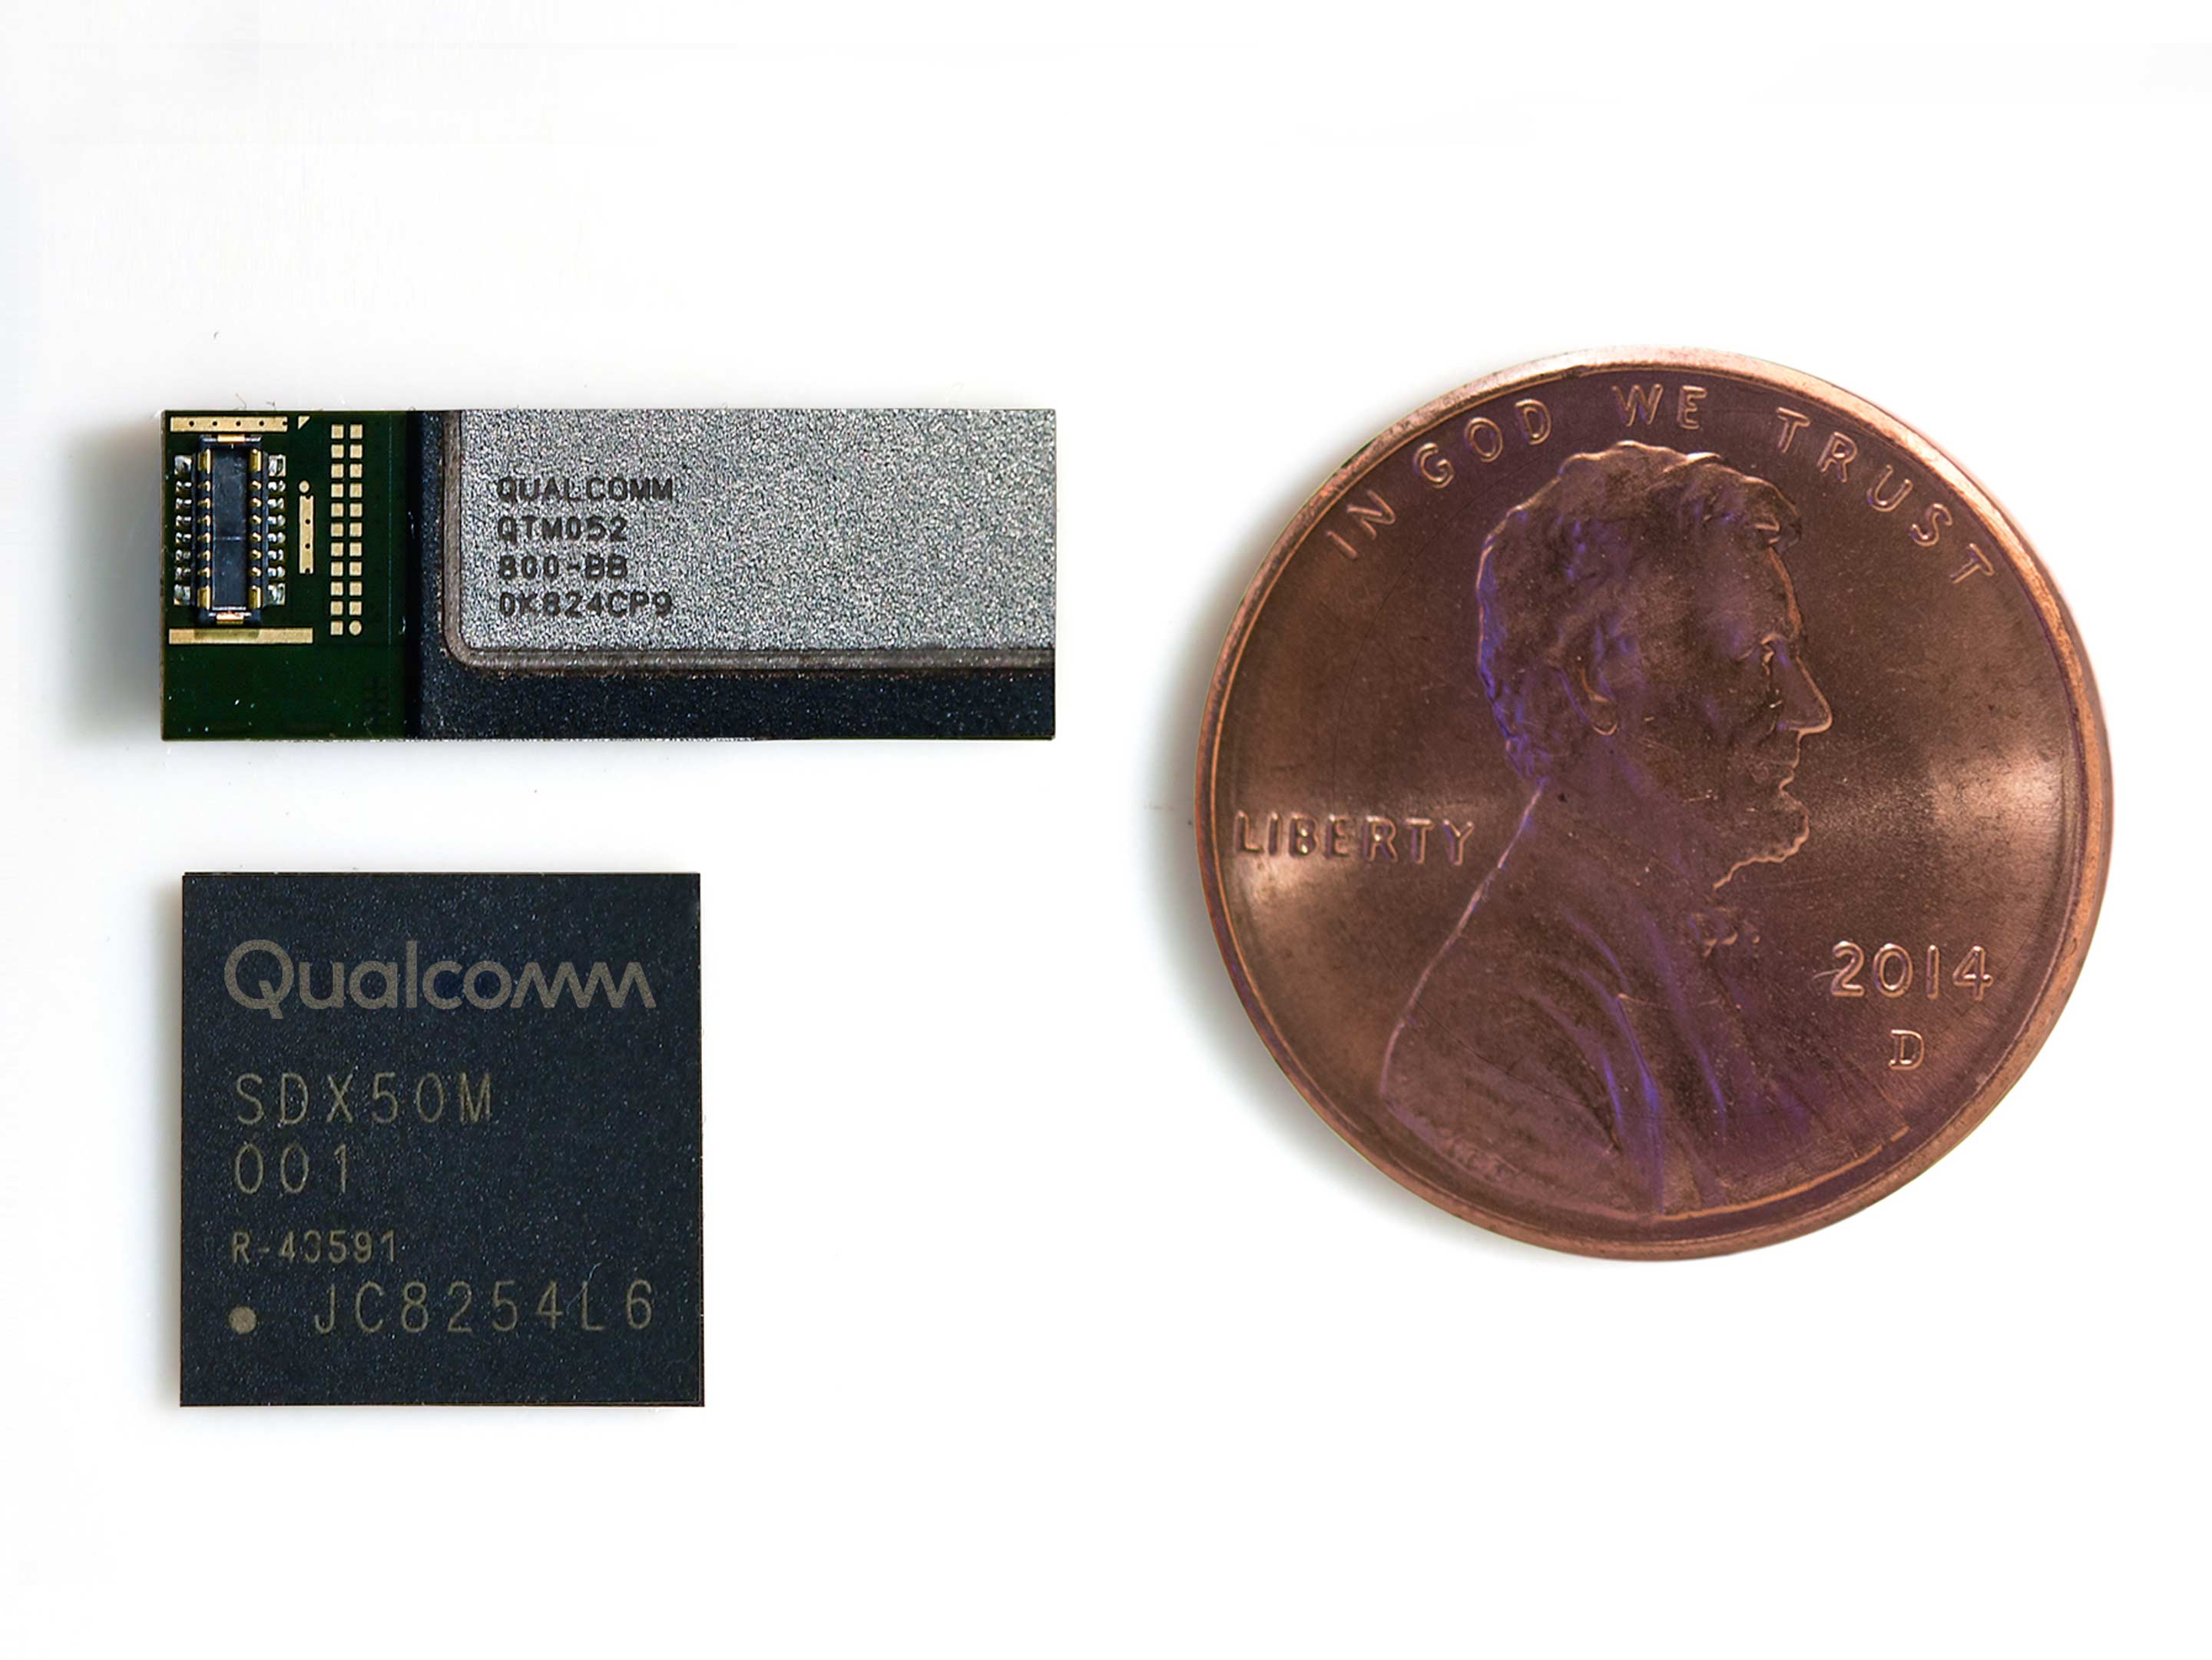 The size of the X50 modem and QTM052 antenna module compared to an American penny